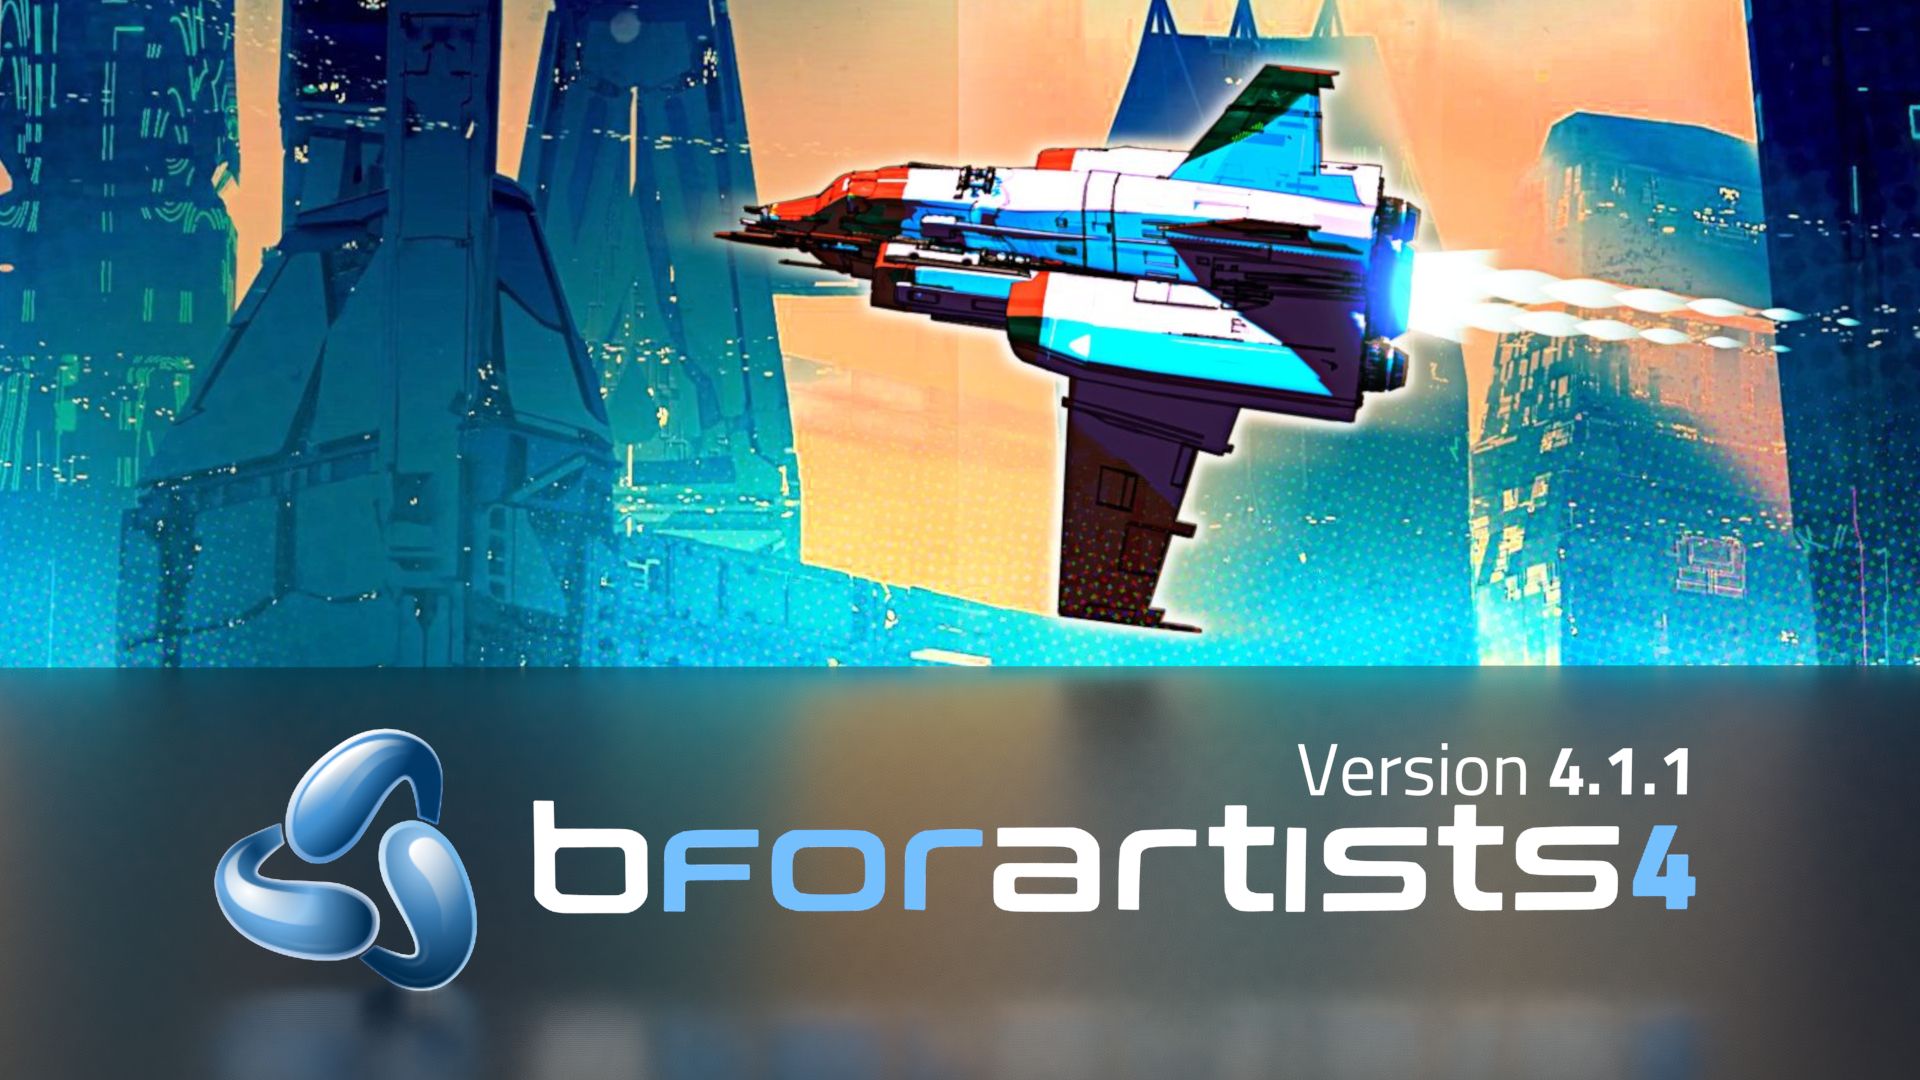 Read more about the article Bforartists 4.1.0 Officially Released